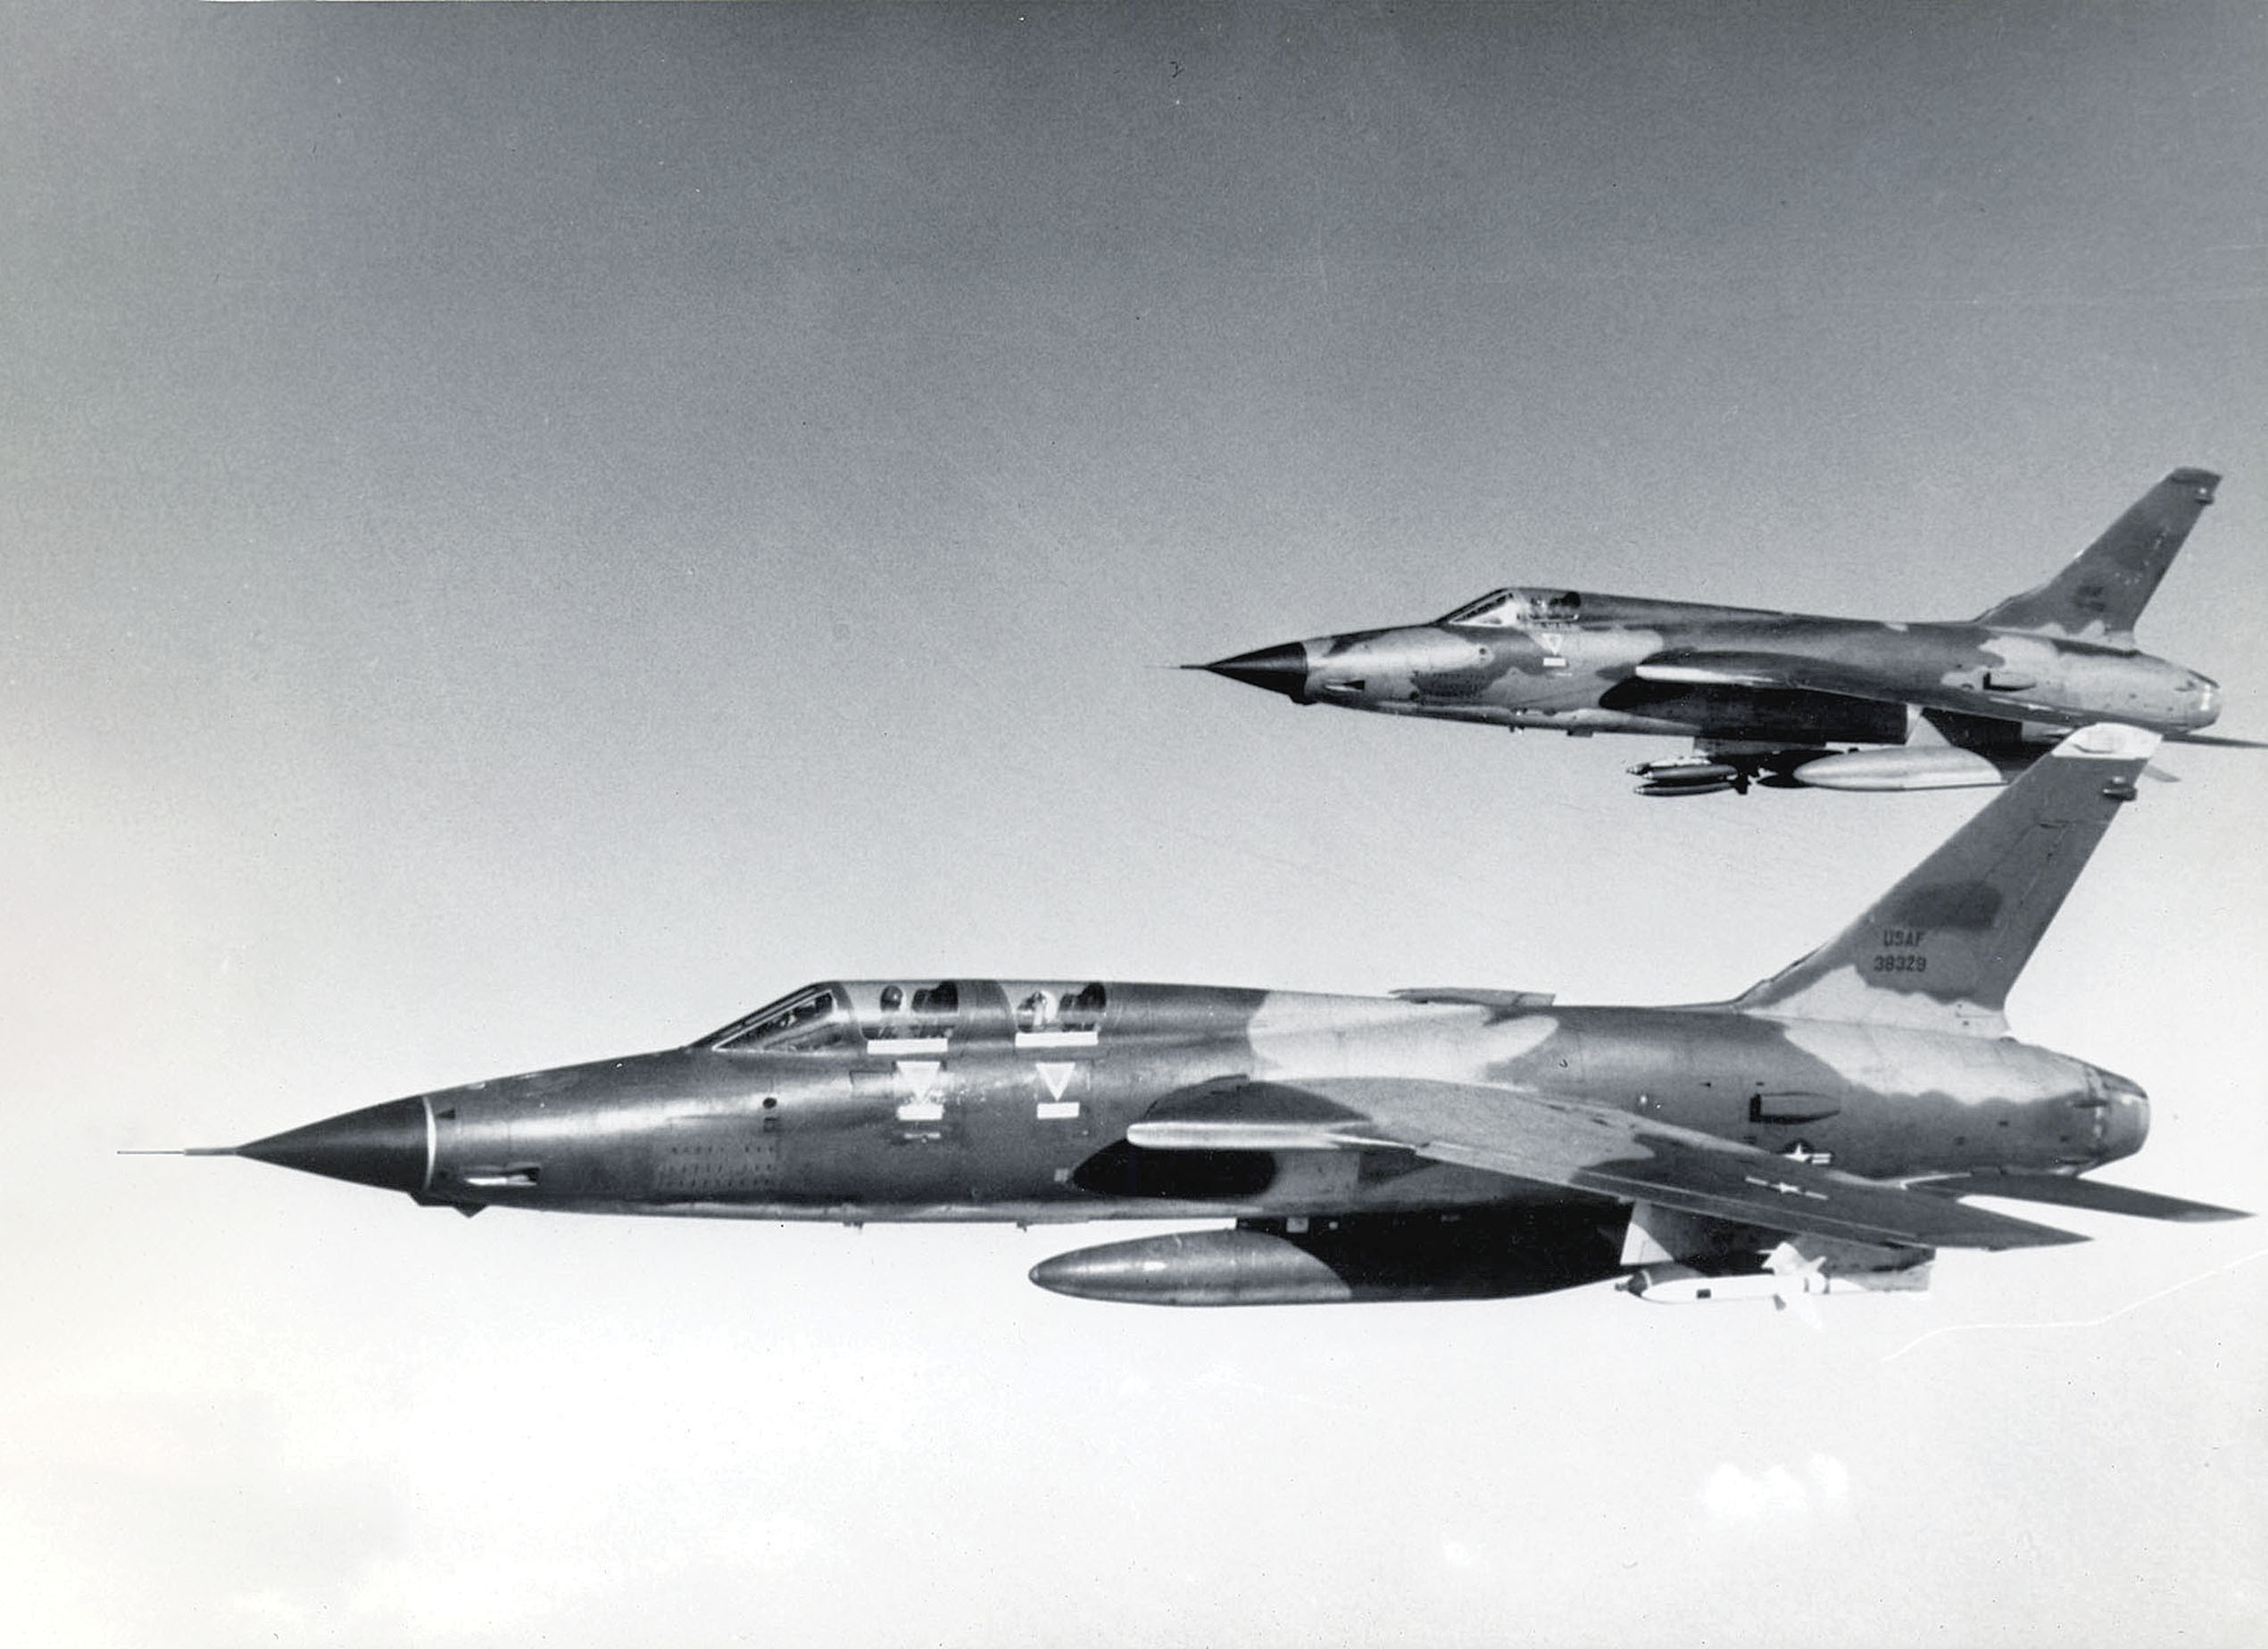 Two F-105 Thunderchiefs are on a “hunter-killer” flight to attack North Vietnam’s surface-to-air missile sites. / U.S. Air Force